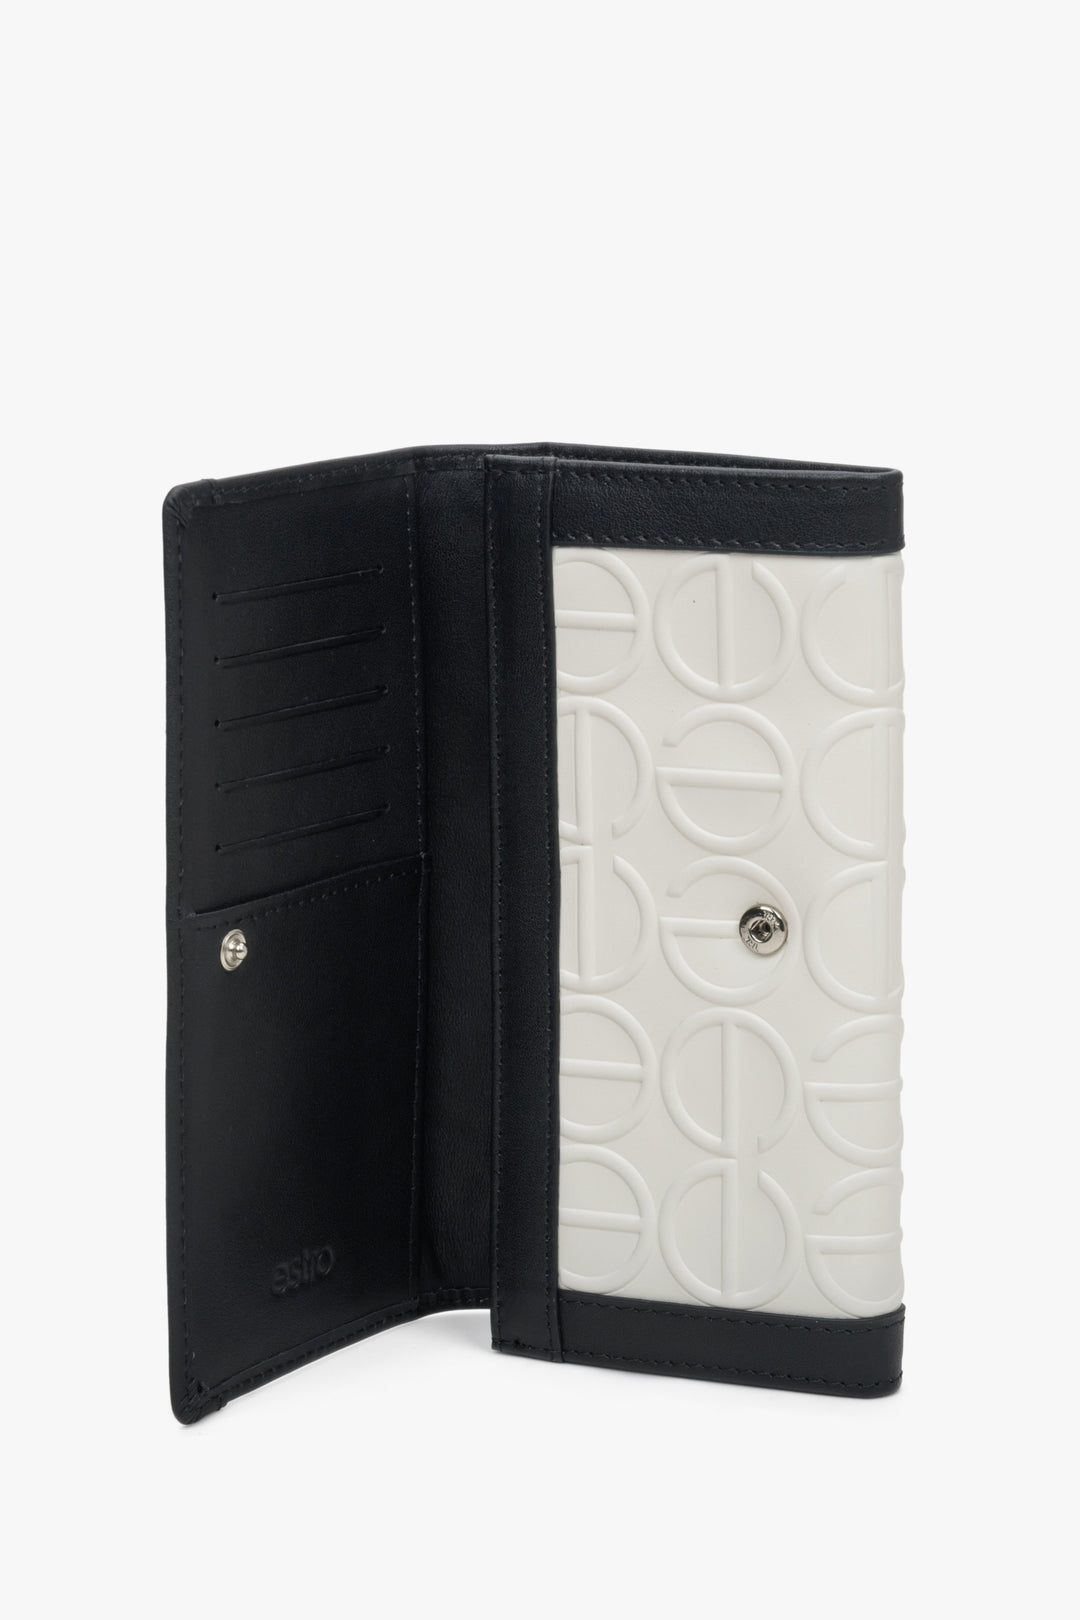 Women's black and white leather  Estro wallet - close-up on the interior.